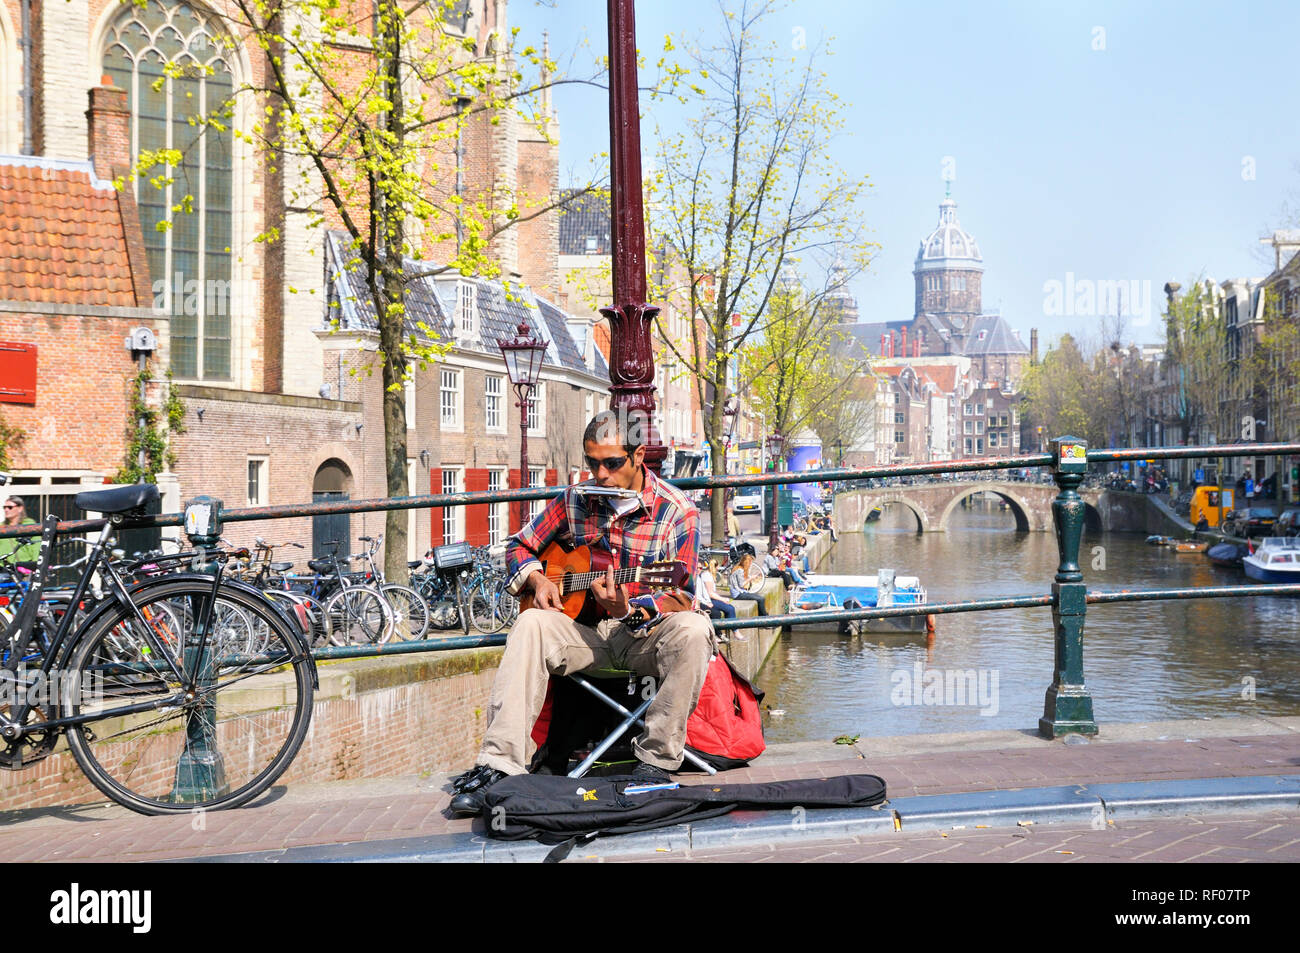 Busker playing guitar and harmonica on a warm spring day in the Red Light District, Amsterdam, North Holland, Netherlands Stock Photo